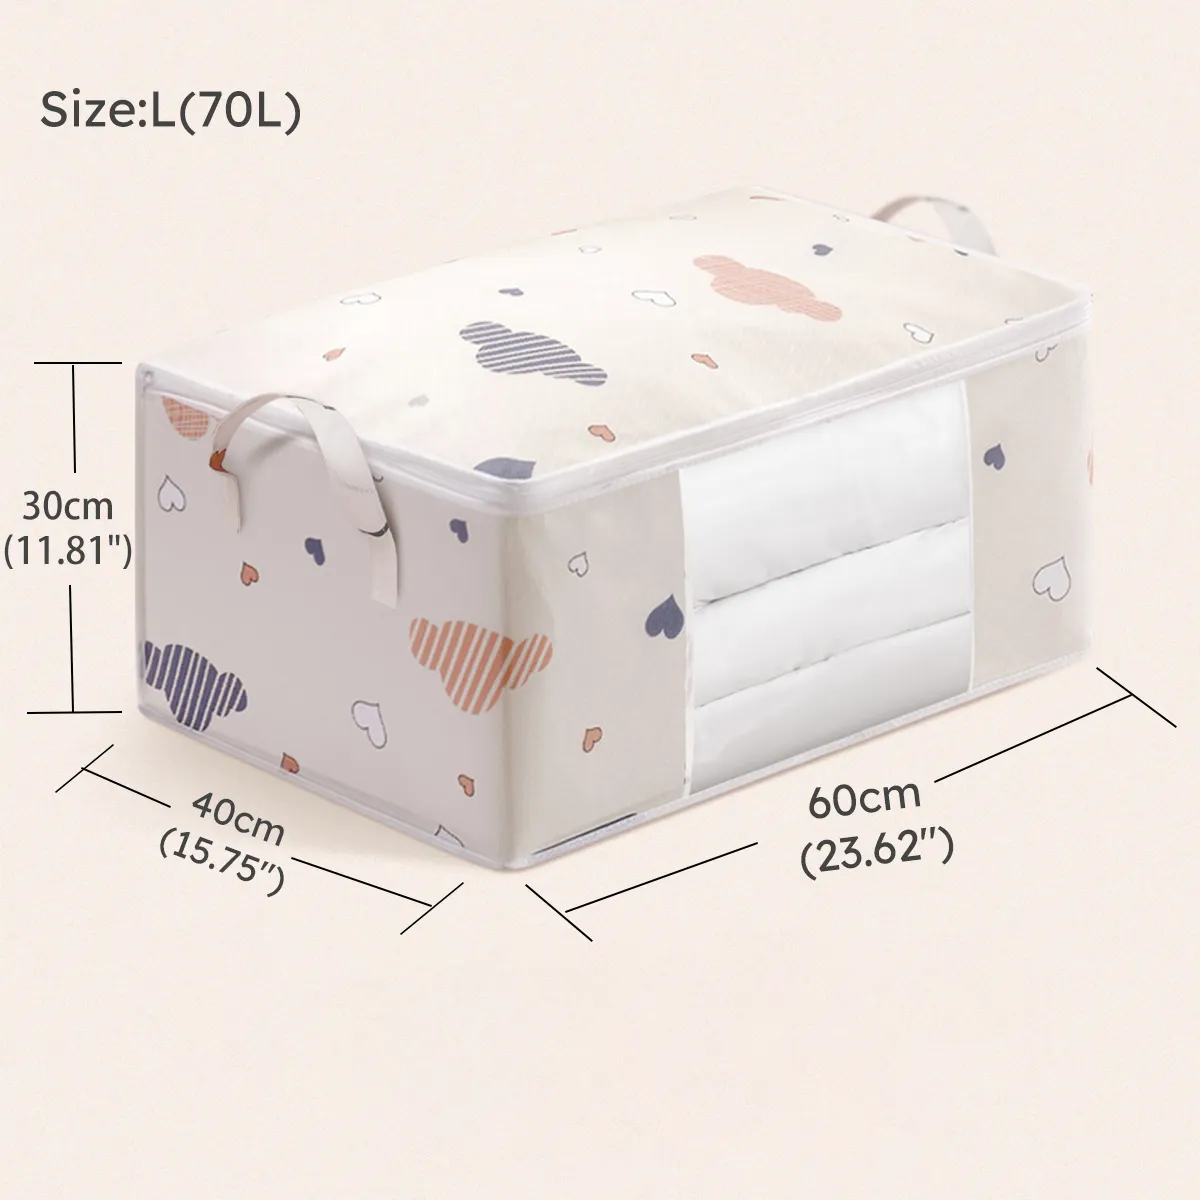 Large Capacity Clothes Quilt Storage Bag Organizer with Handle Clear Window Sturdy Zipper for Comforters Blankets Bedding Clothes Beige big image 1